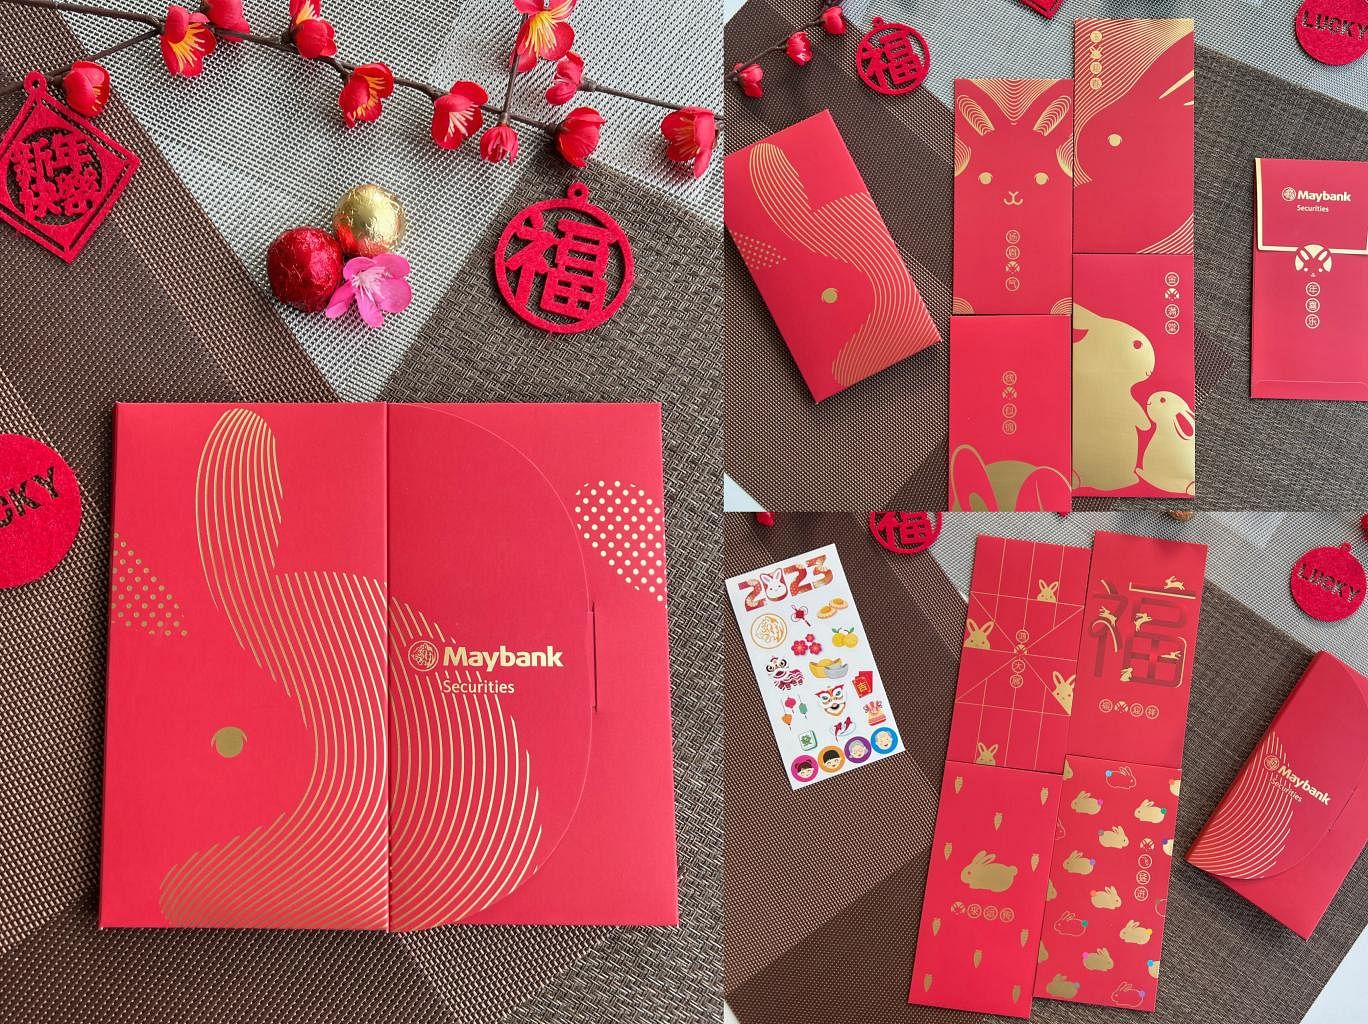 Brand red packets  Red packet, Red envelope, Gift wrapping